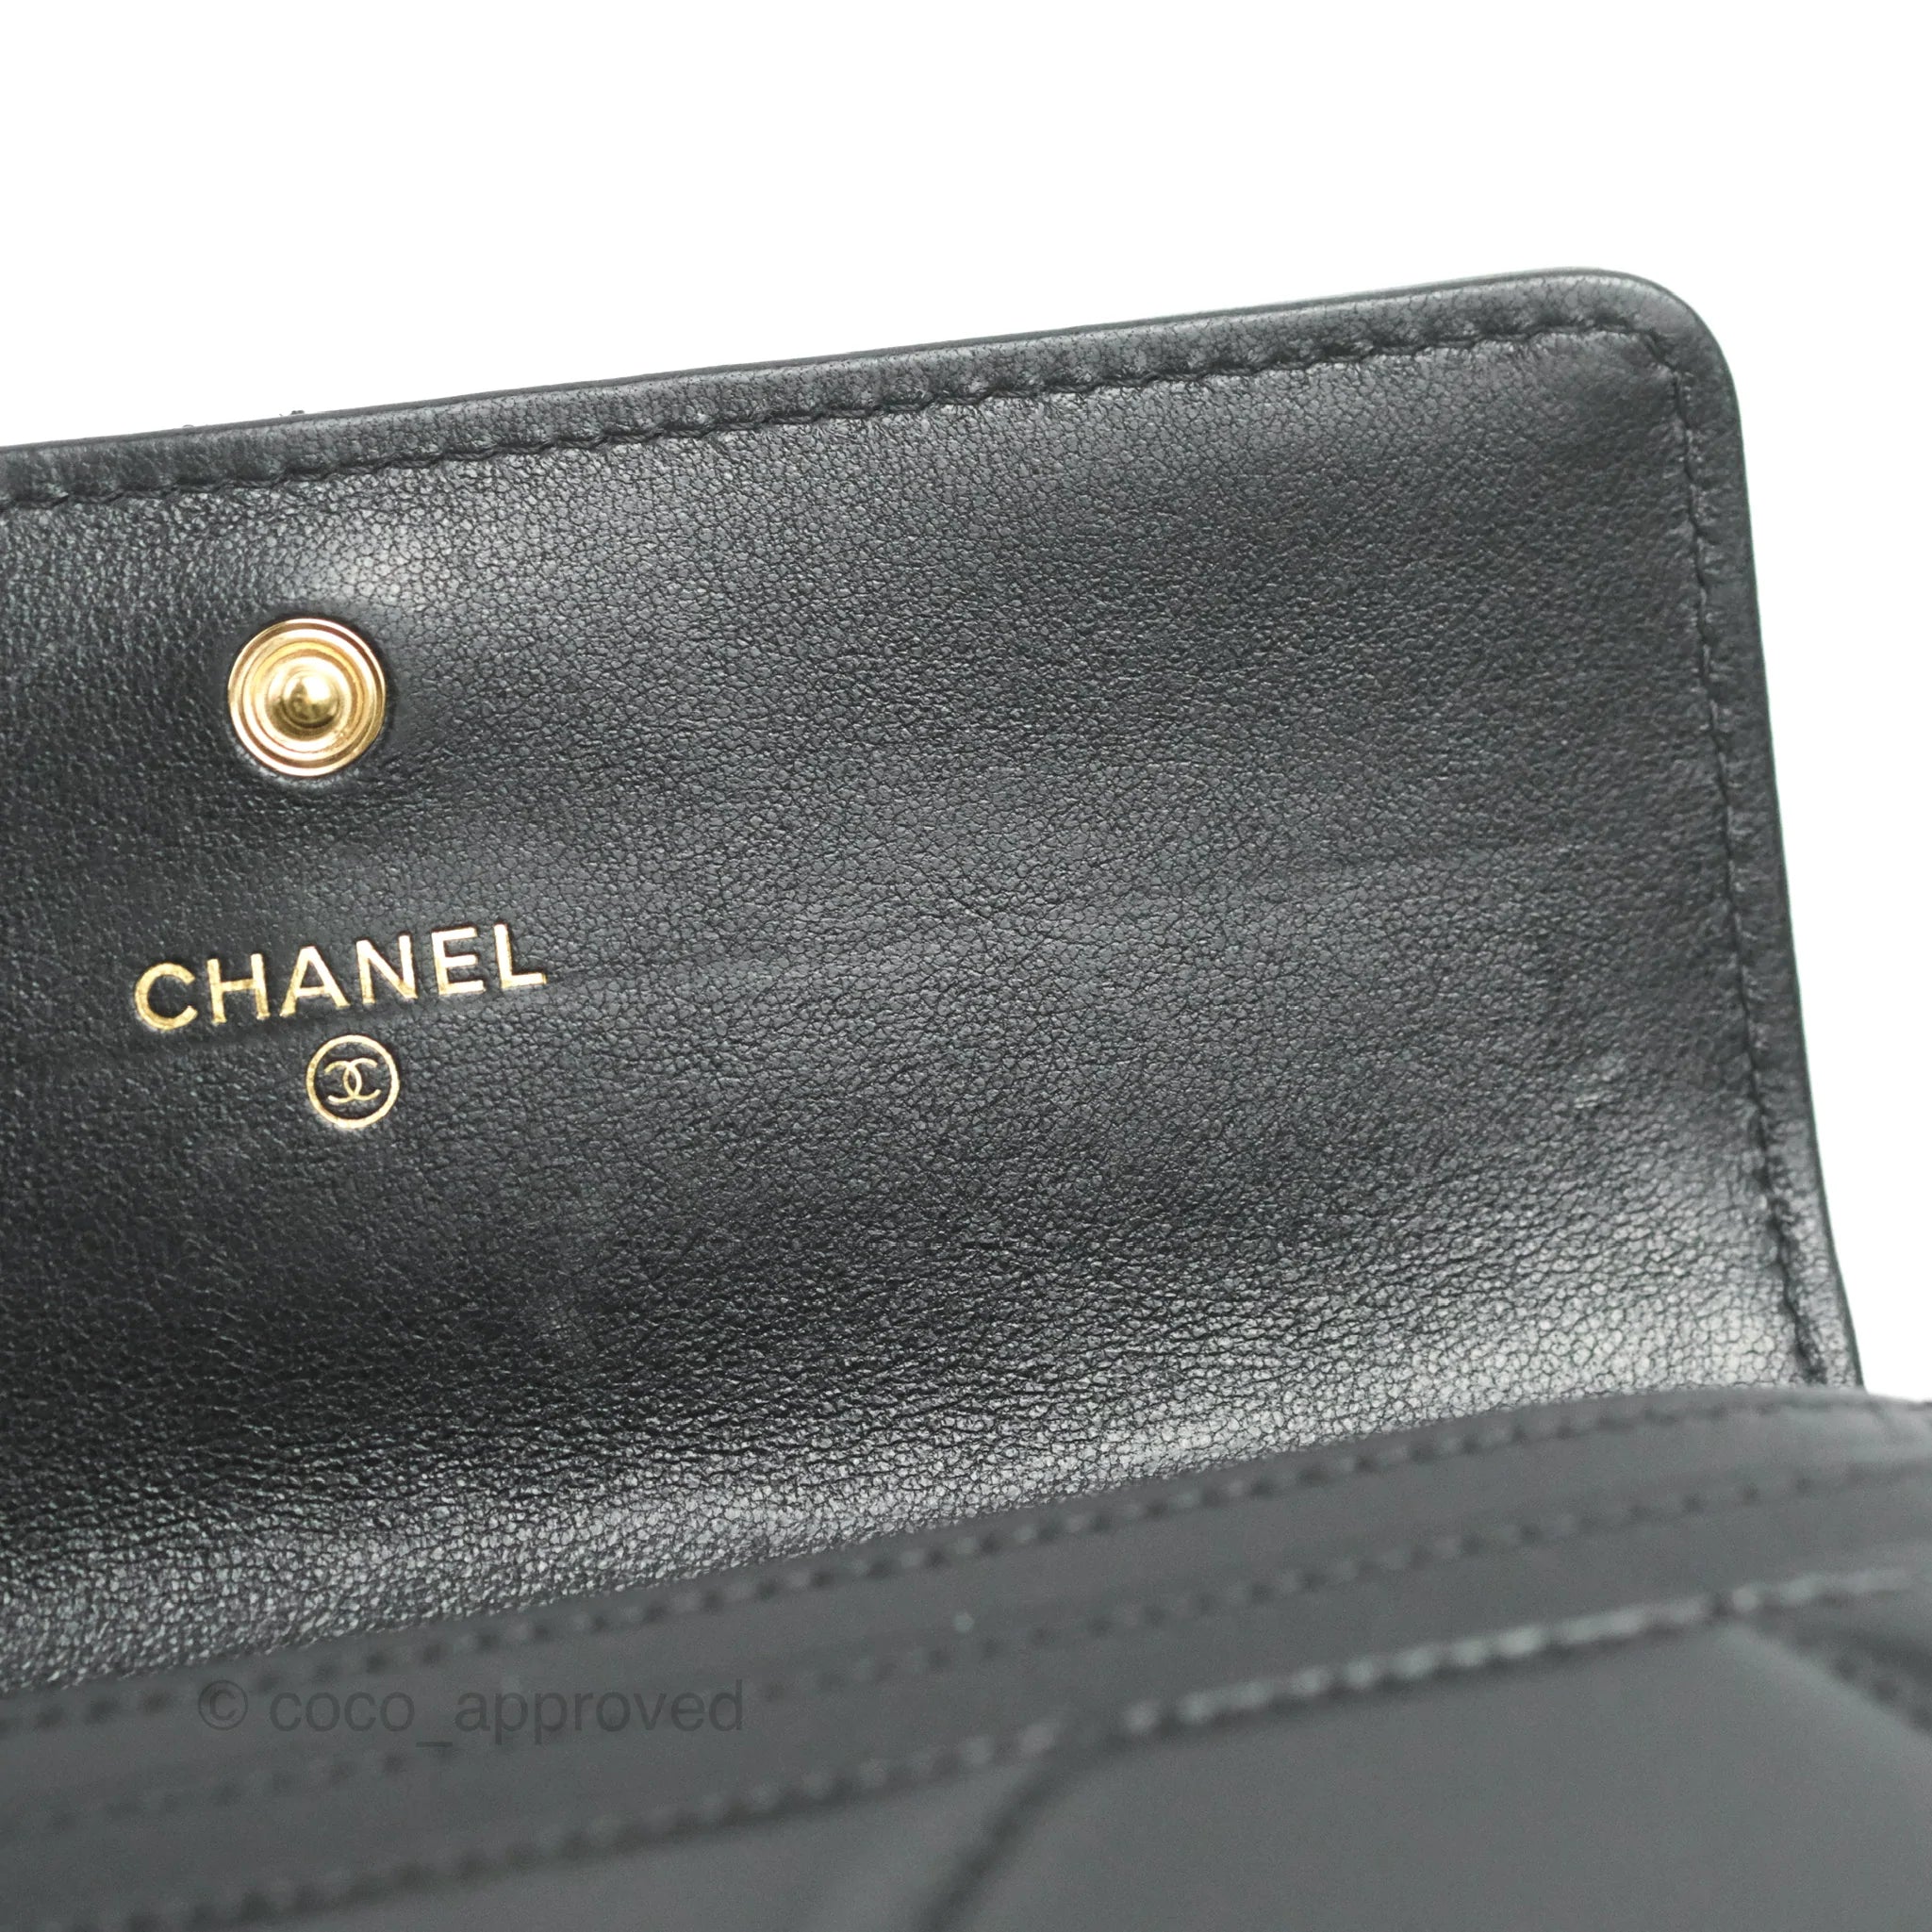 CHANEL Lambskin Quilted Small Compact Wallet Black 1269069